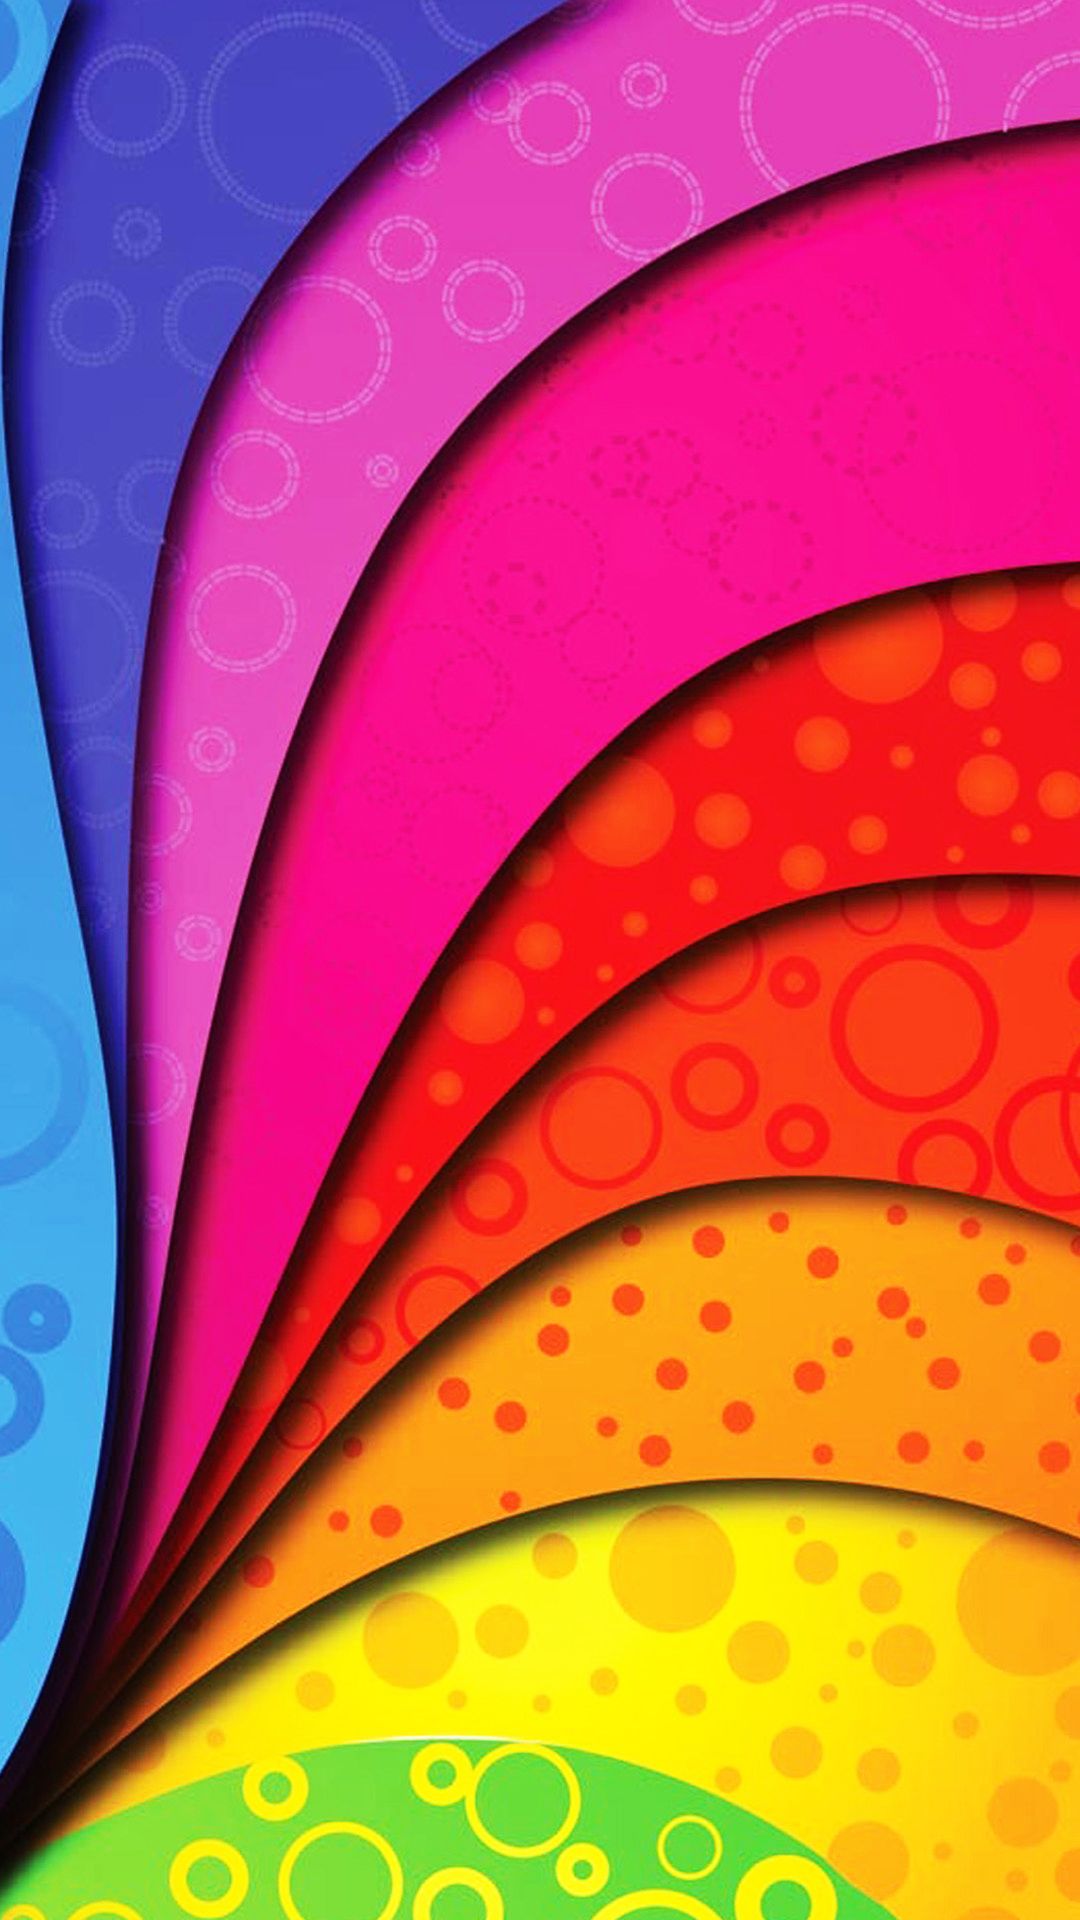 Colorful Swirl Rainbow Dots Android Wallpaper free download